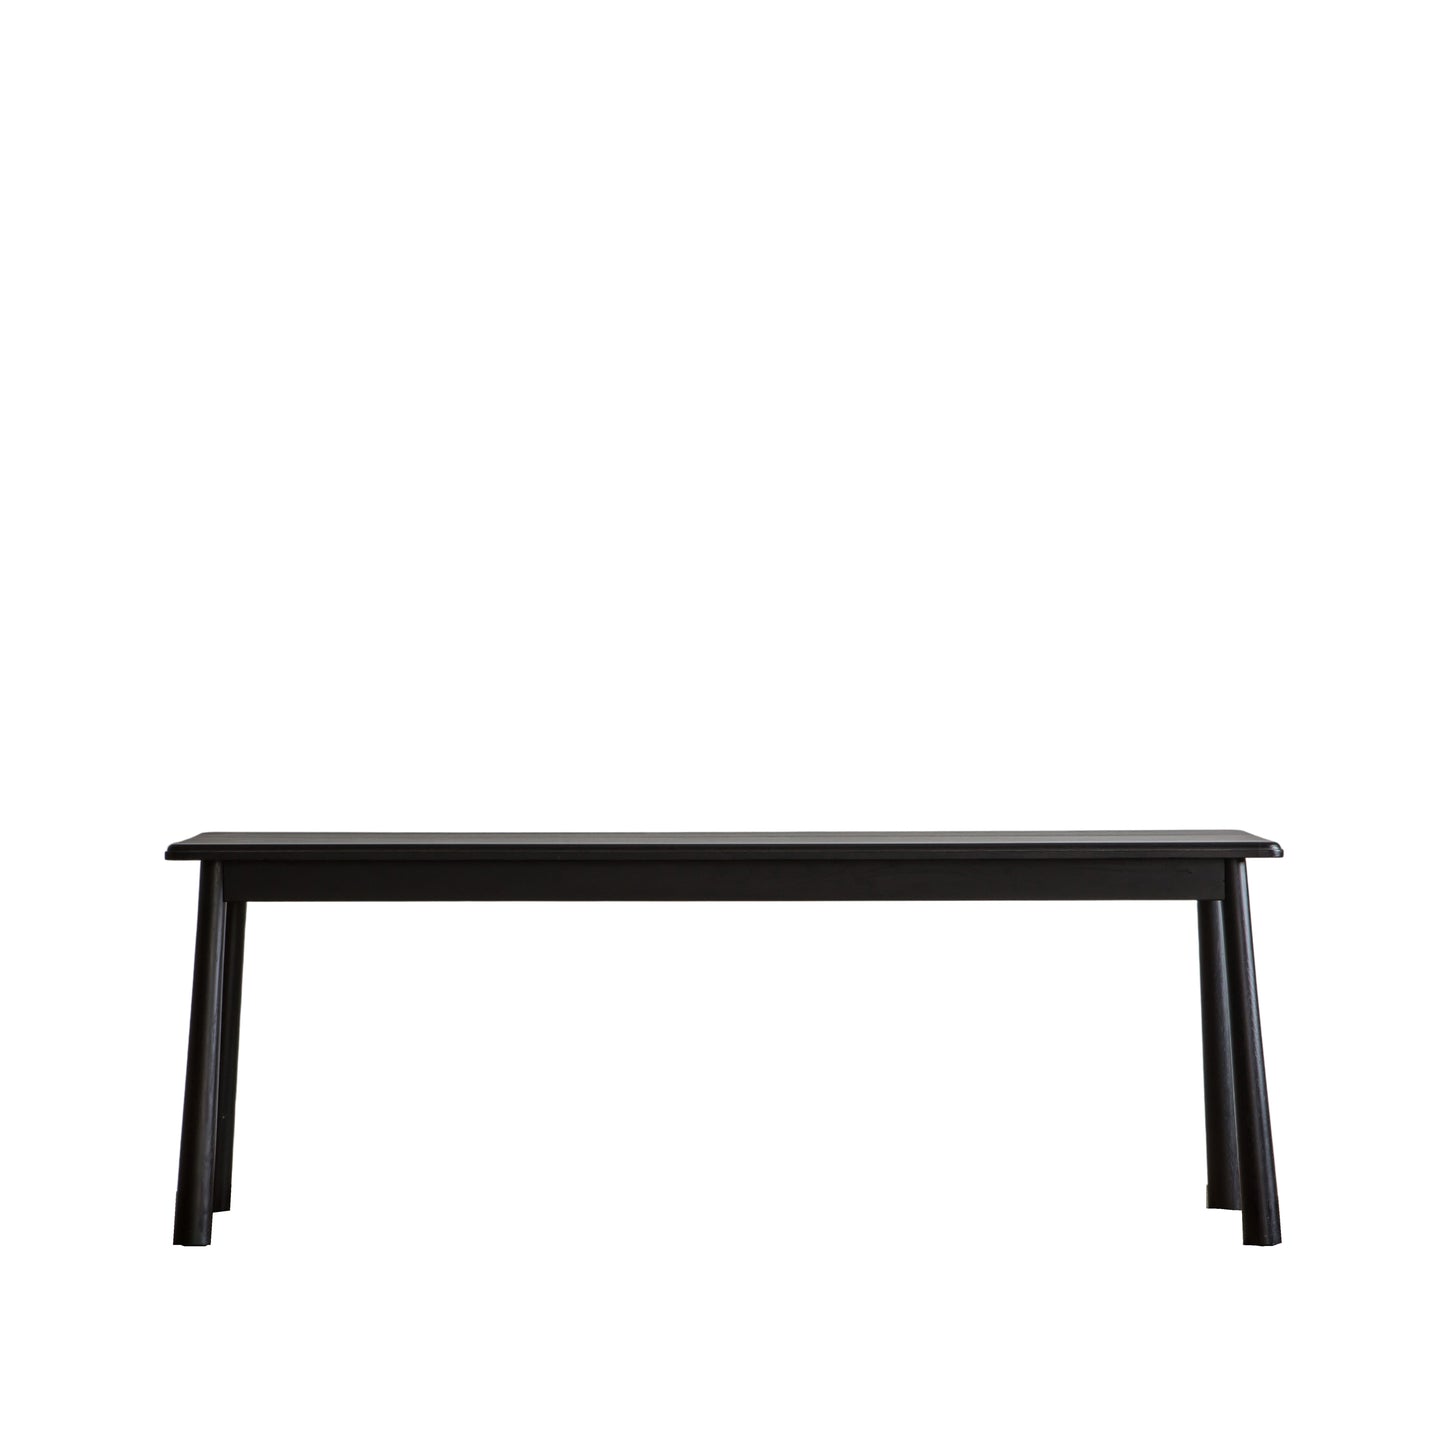 A Tigley Dining Bench Black on a white background, sold by Kikiathome.co.uk.